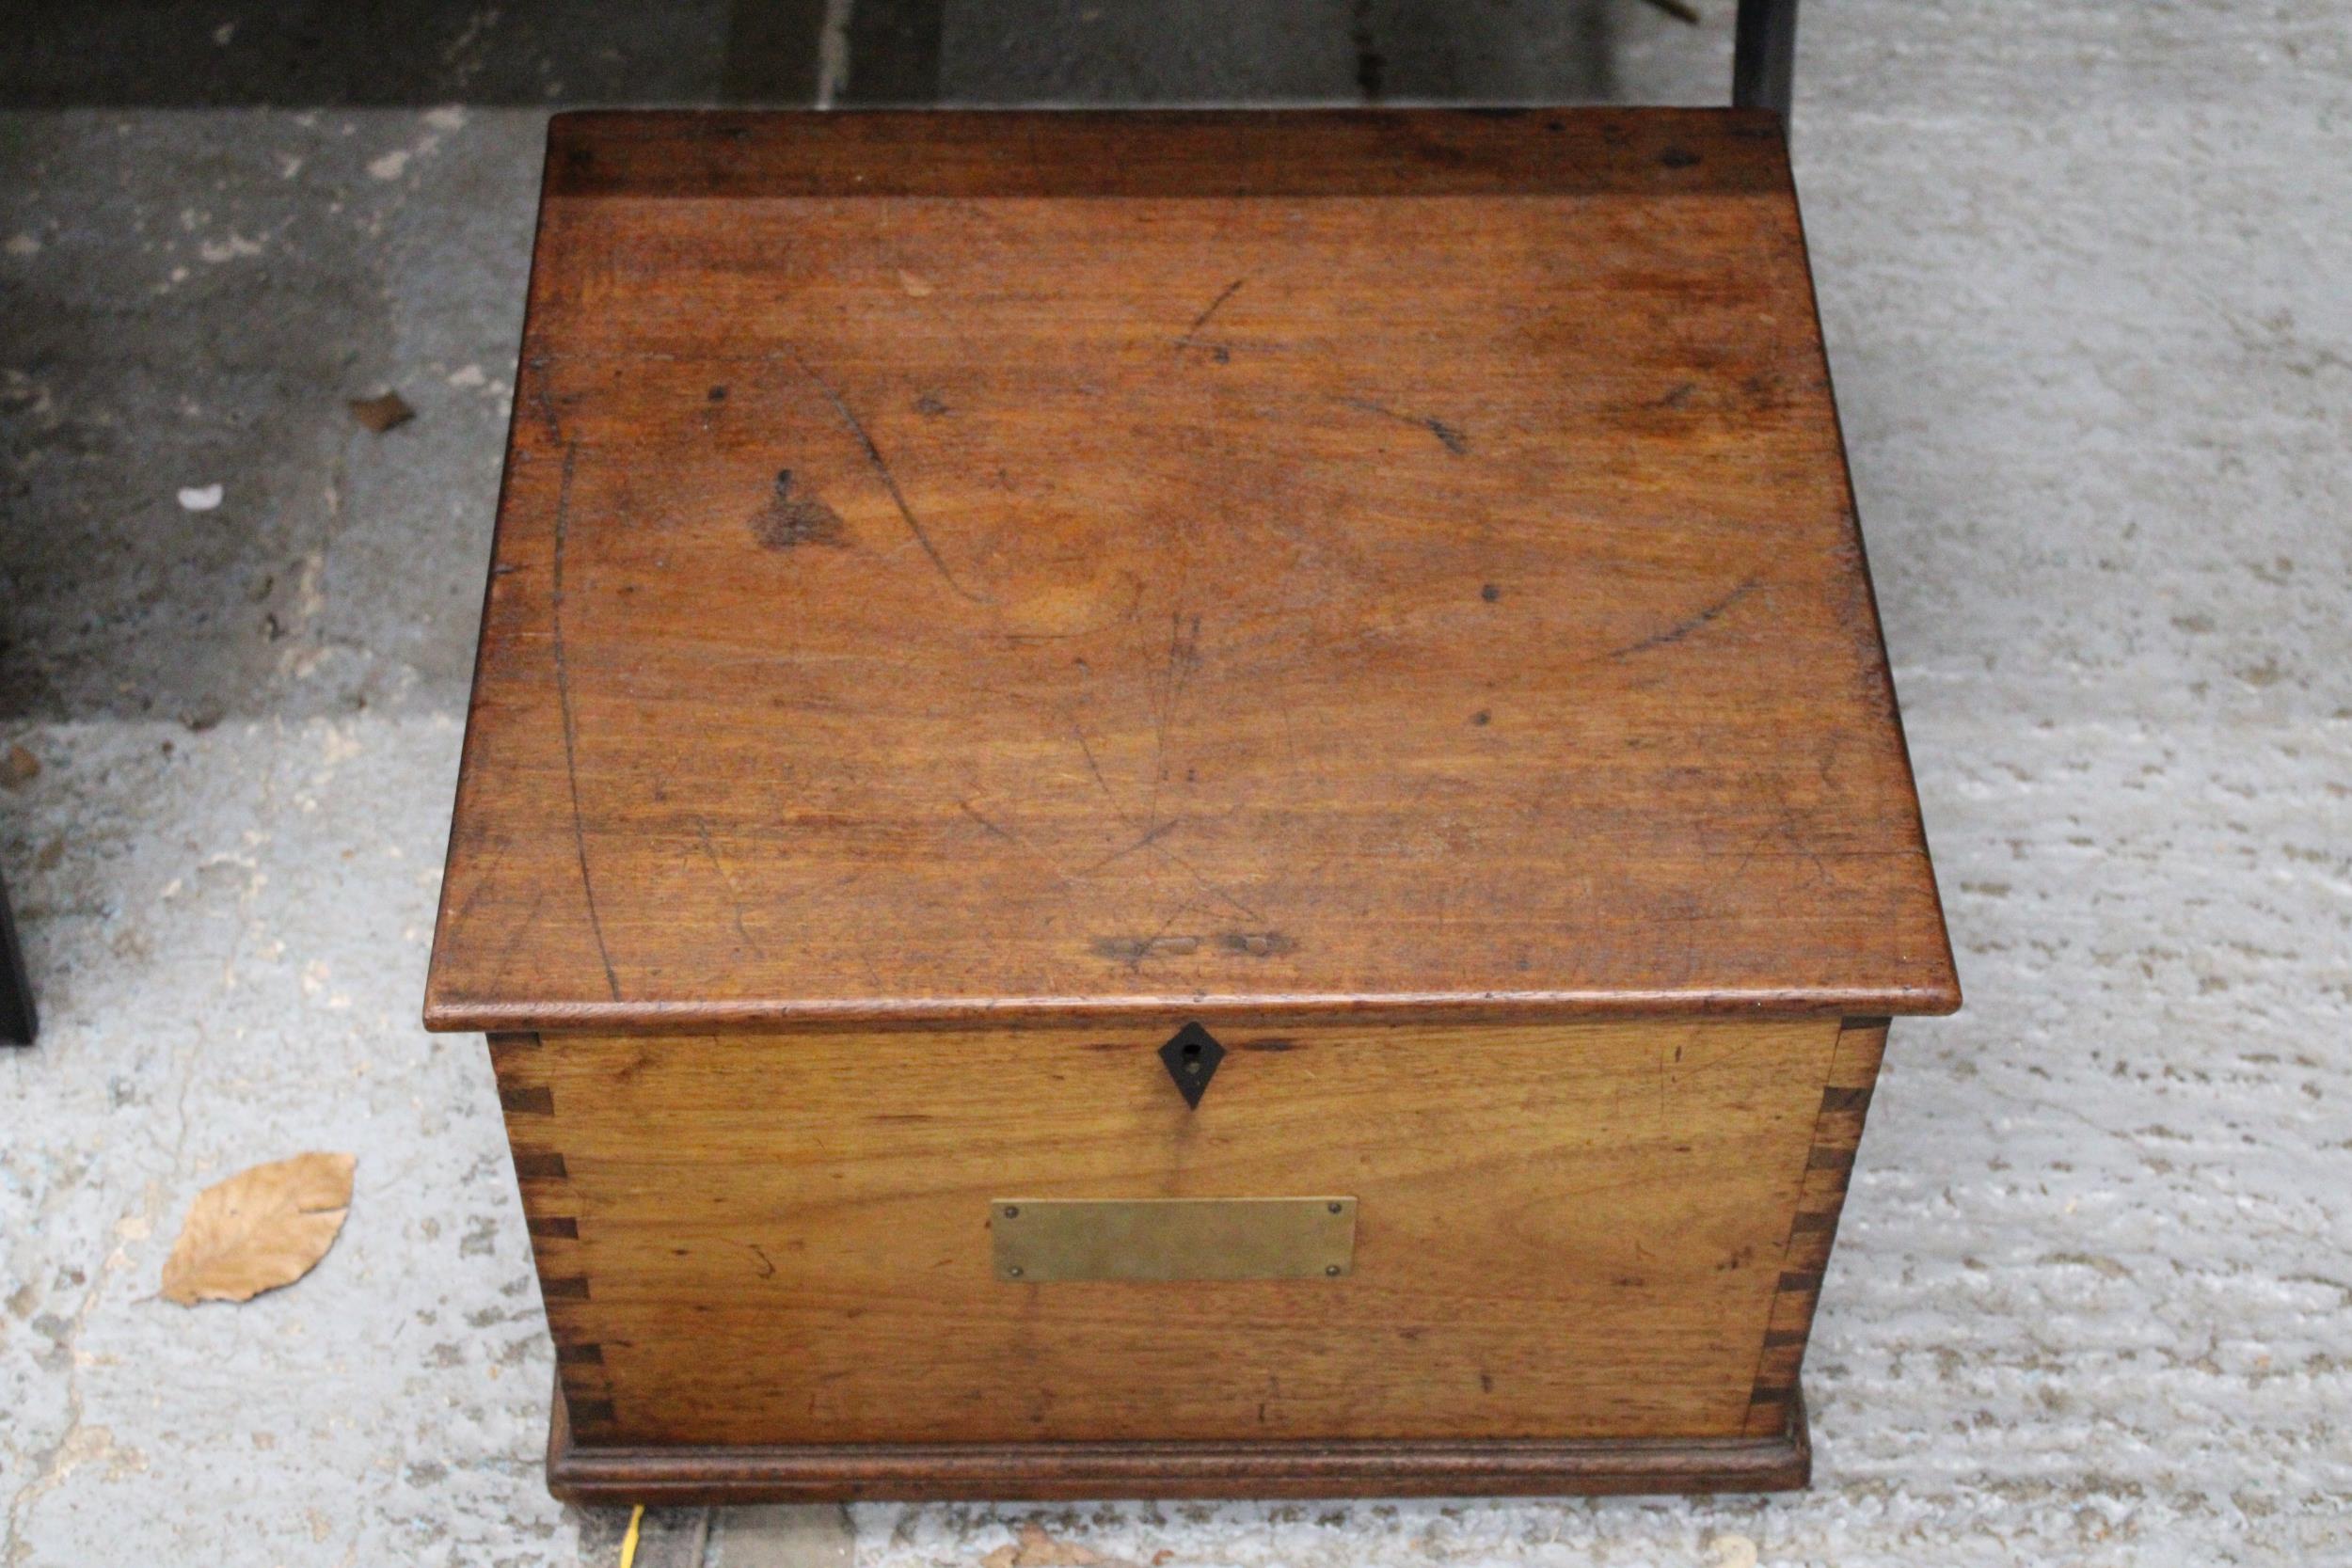 A LARGE VINTAGE MAHOGANY BOX WITH BRASS PLAQUE AND DOVETAIL JOINTS, HEIGHT 33CM, WIDTH 49CM, DEPTH - Image 2 of 4